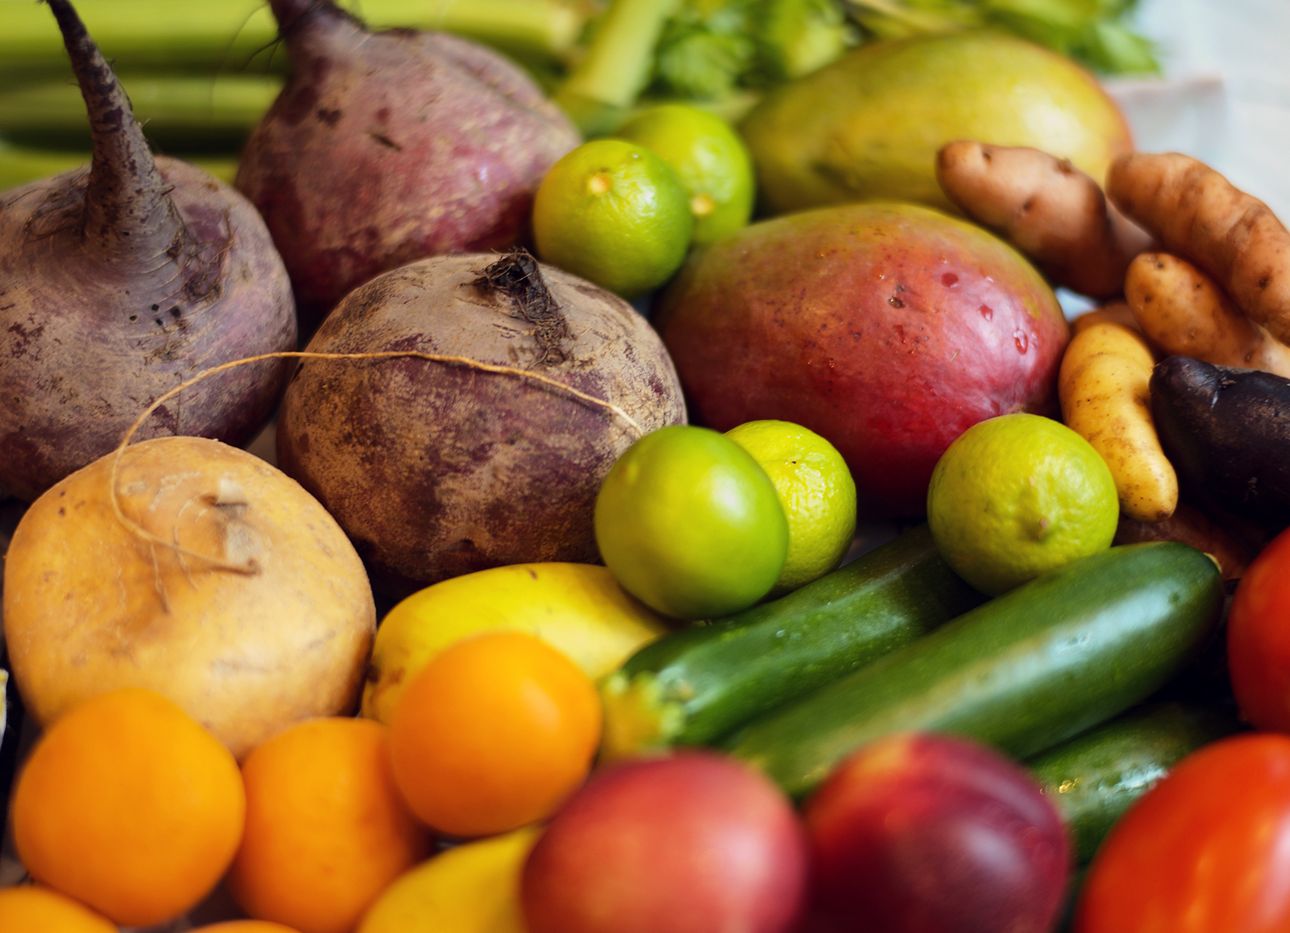 An assortment of brightly colored fruits and vegetables in close up.